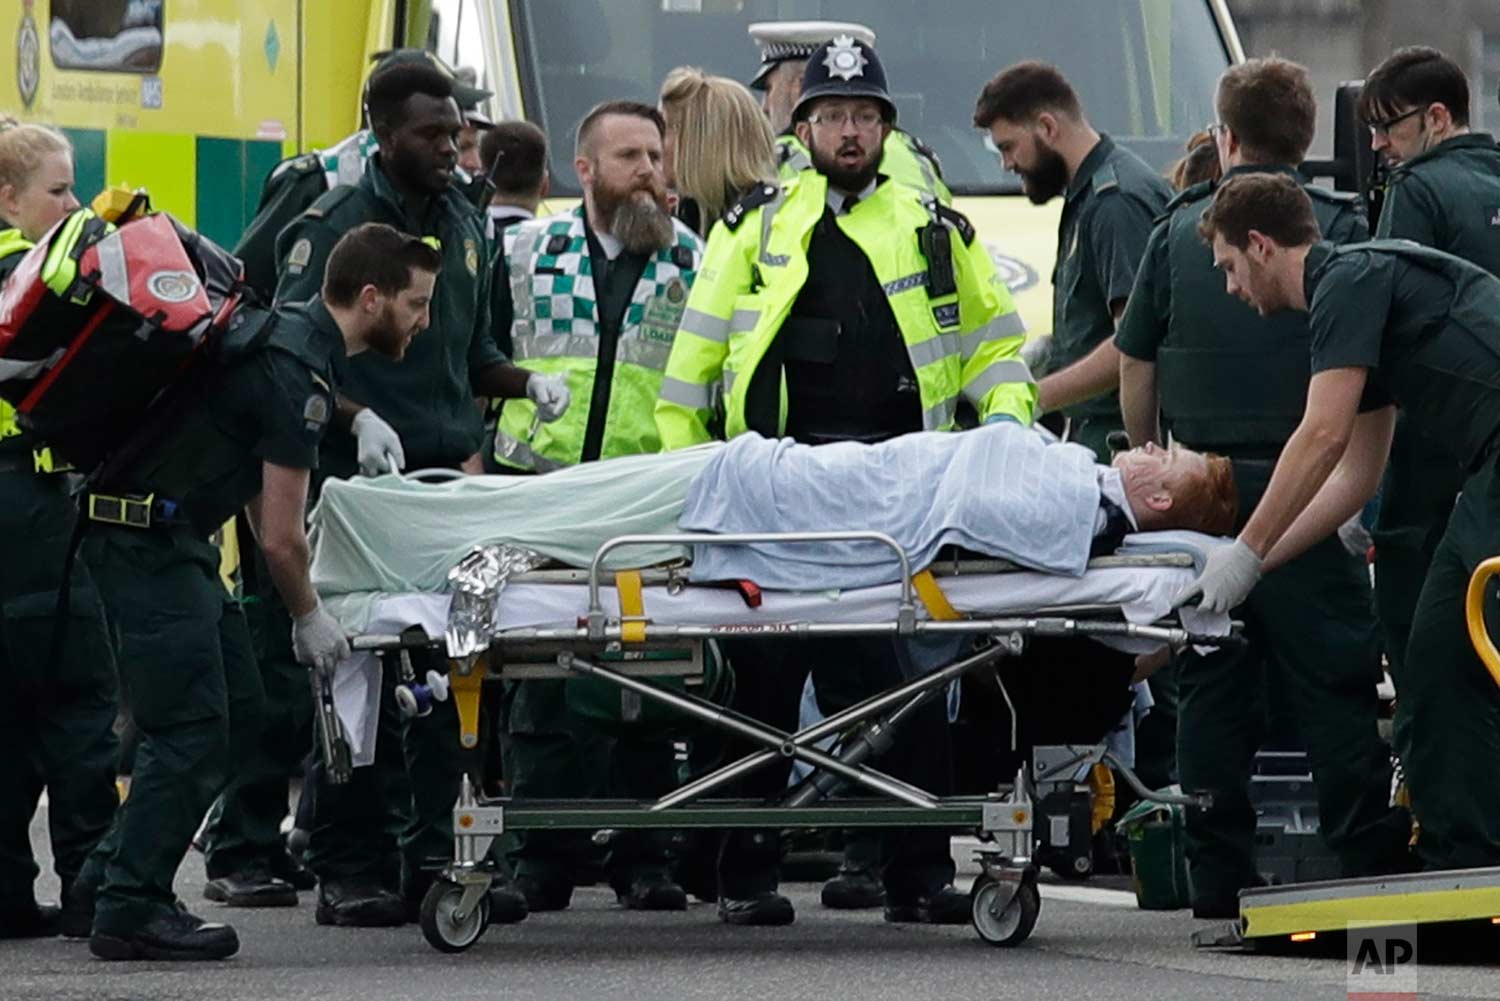  In this Wednesday, March 22, 2017 photo, emergency services staff provide medical attention to injured people on Westminster Bridge, near the Houses of Parliament in London. The Islamic State group claimed responsibility for the attack by a man who 